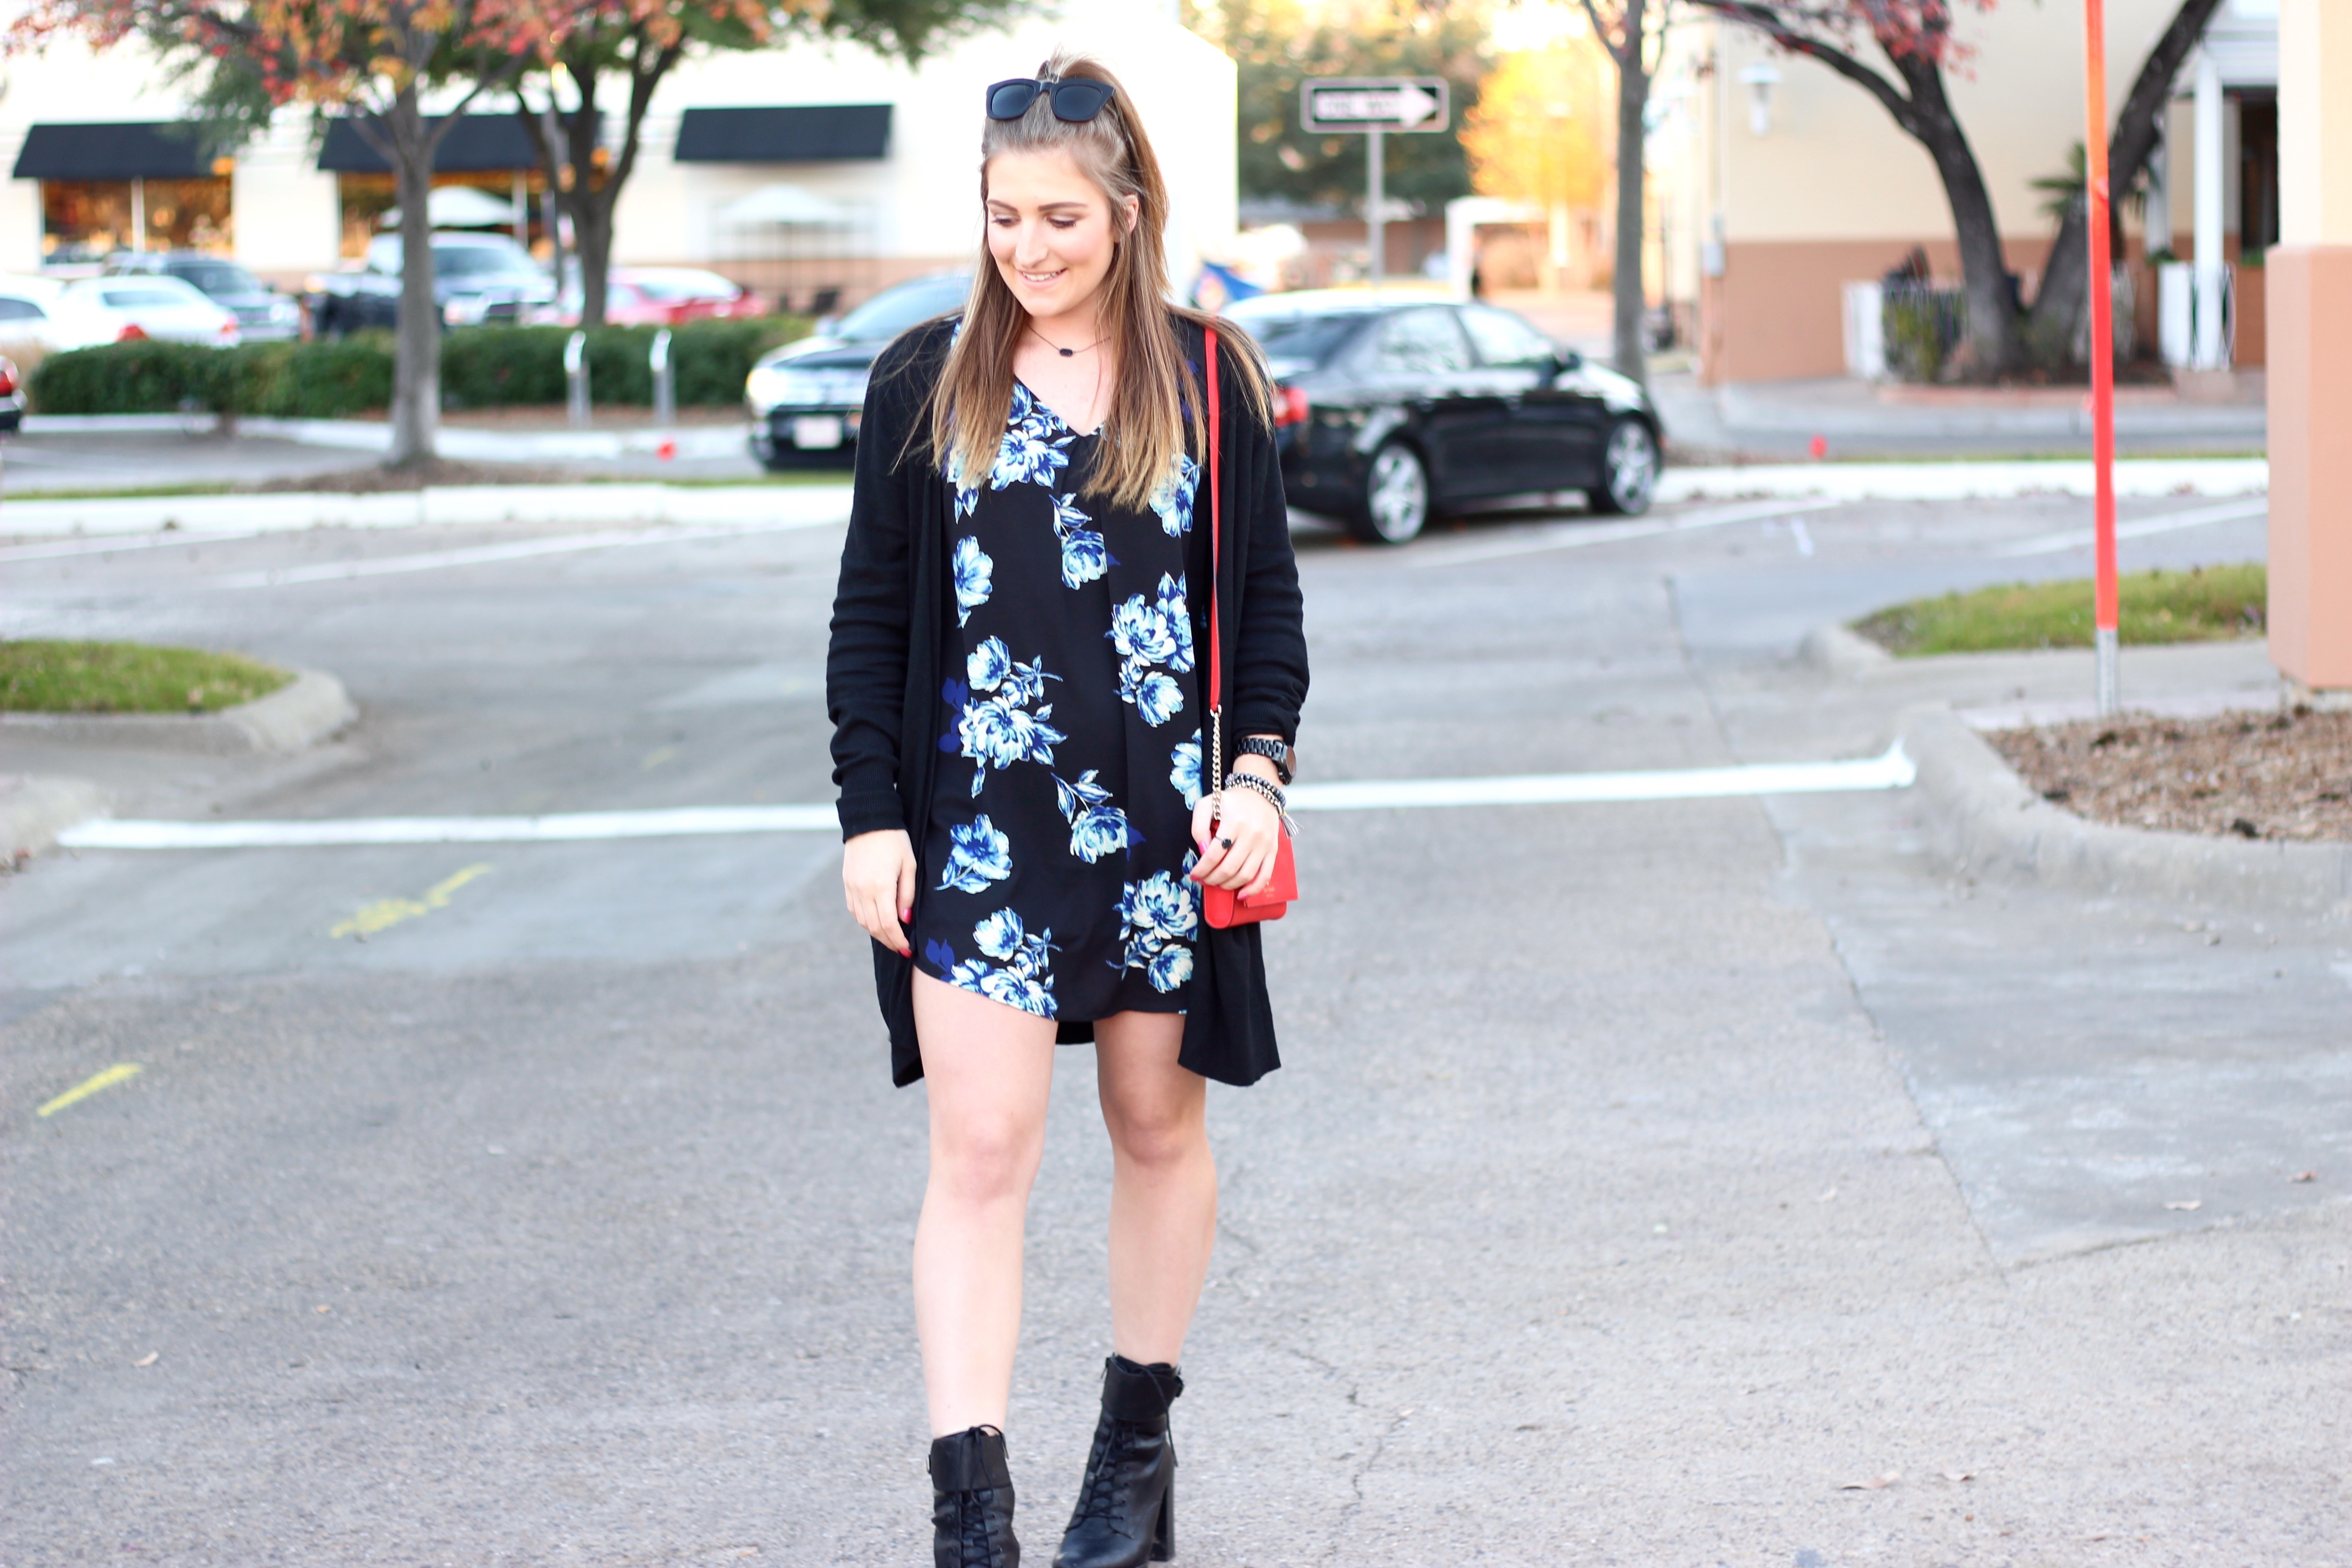 walking girl in dallas with an edgy look